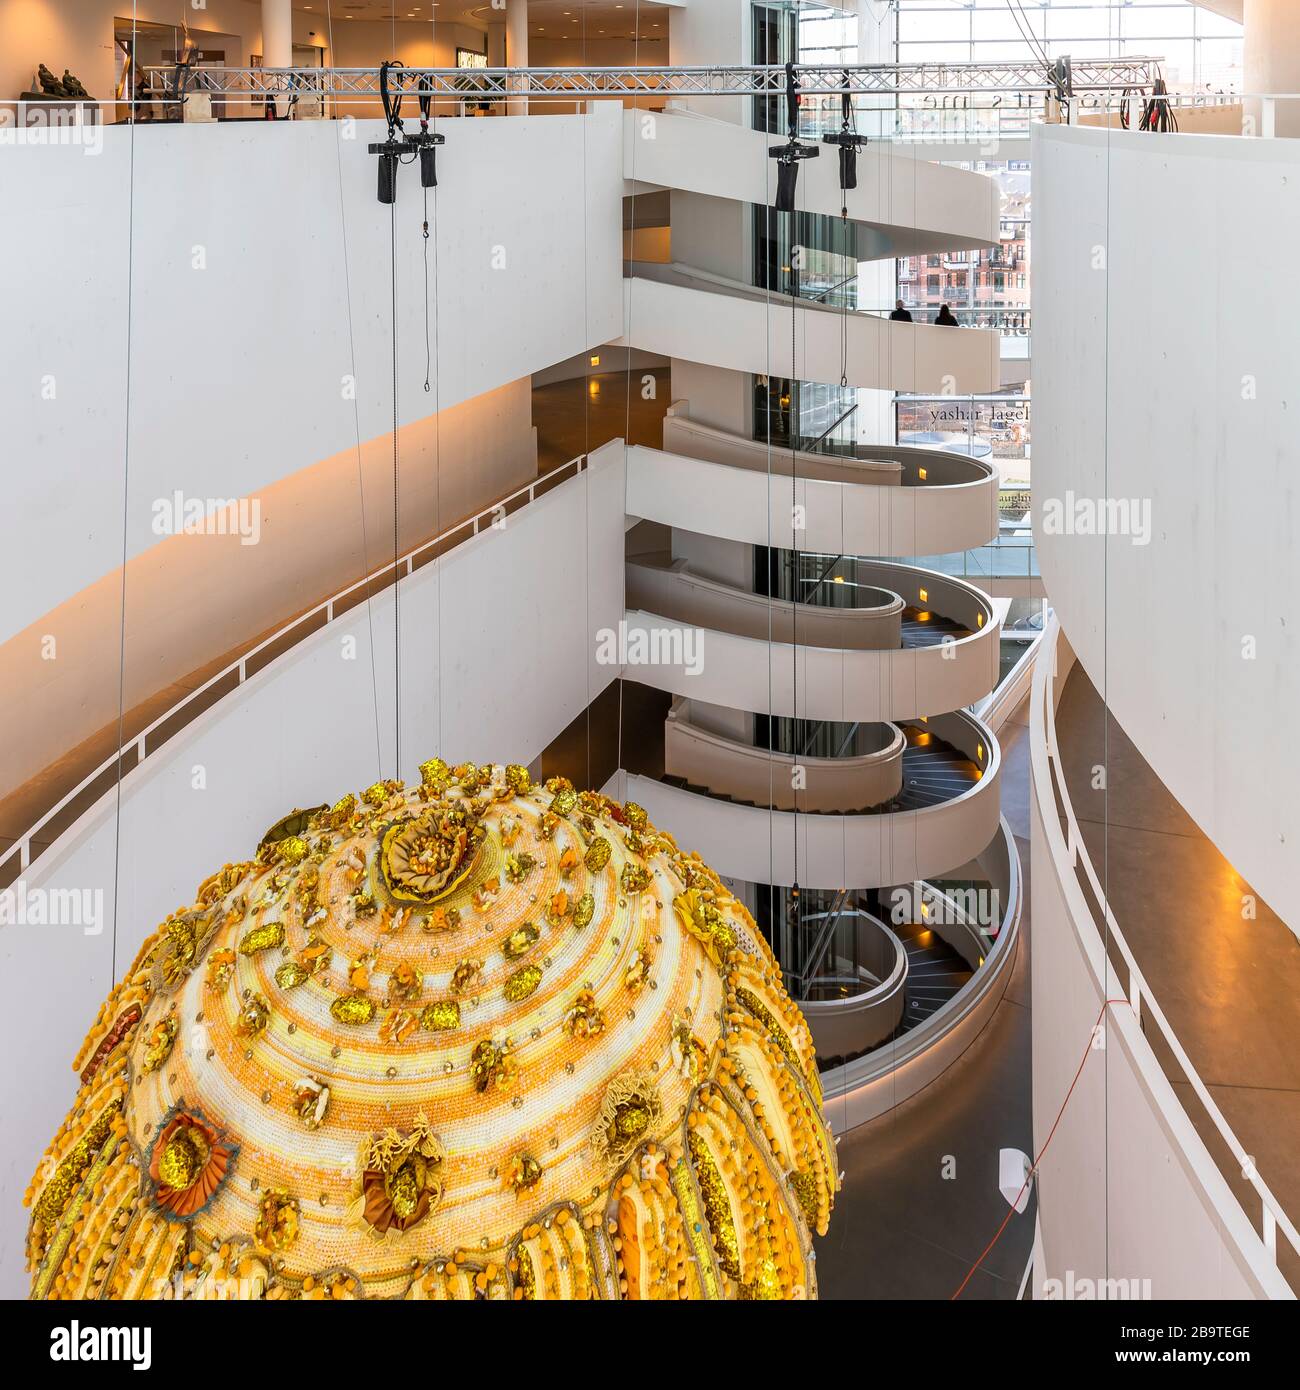 Inside the ARoS art gallery in Aarhus, Denmark. Designed by architects Schmidt Hammer Lassen. Galleries are accessed via a central spiral staircase. Stock Photo